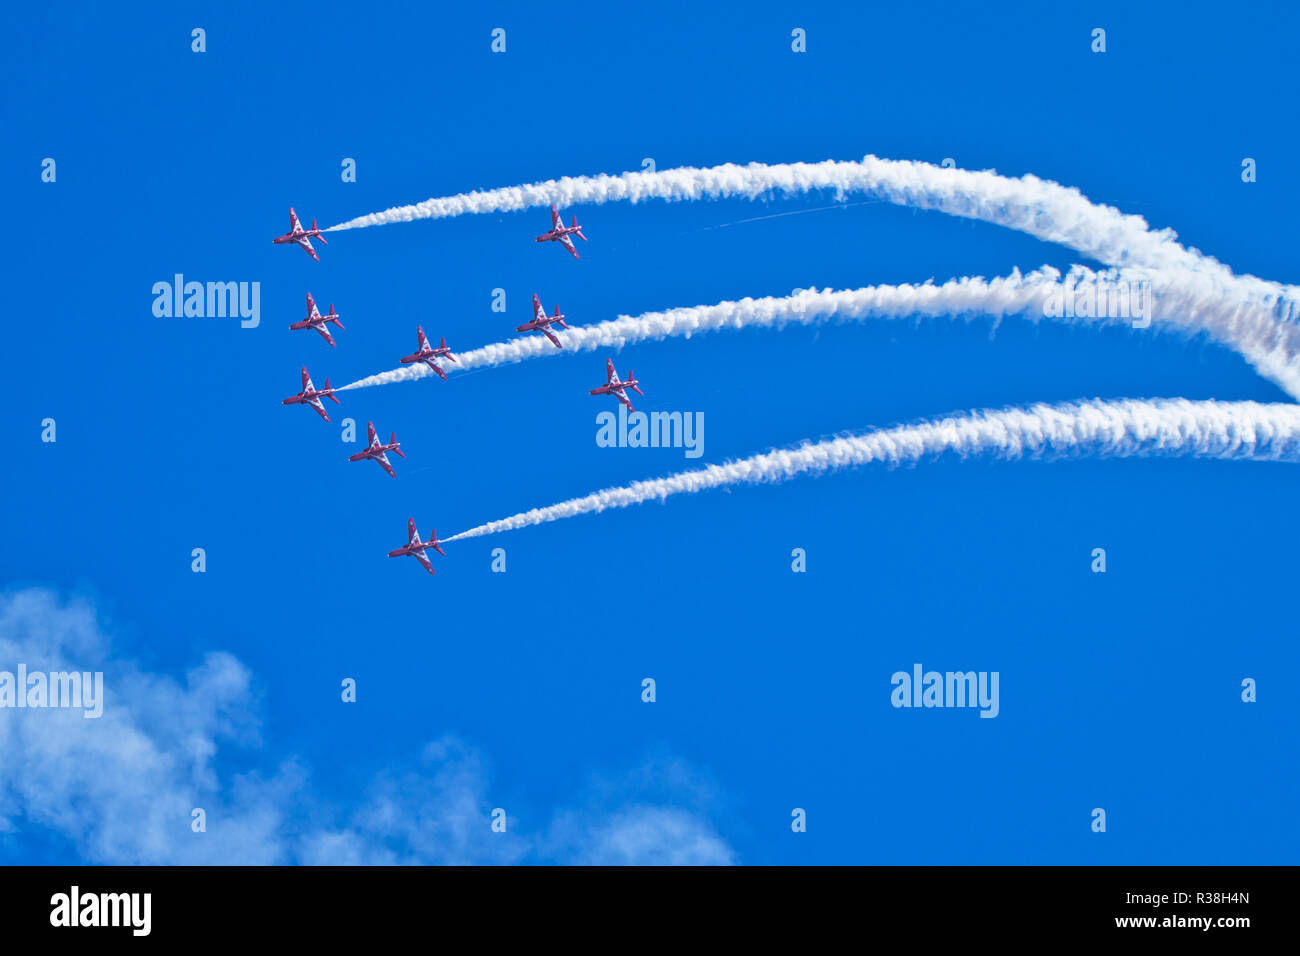 The Red Arrows, officially known as the Royal Air Force Aerobatic Team, is the aerobatics display team of the Royal Air Force based at RAF Scampton. Stock Photo